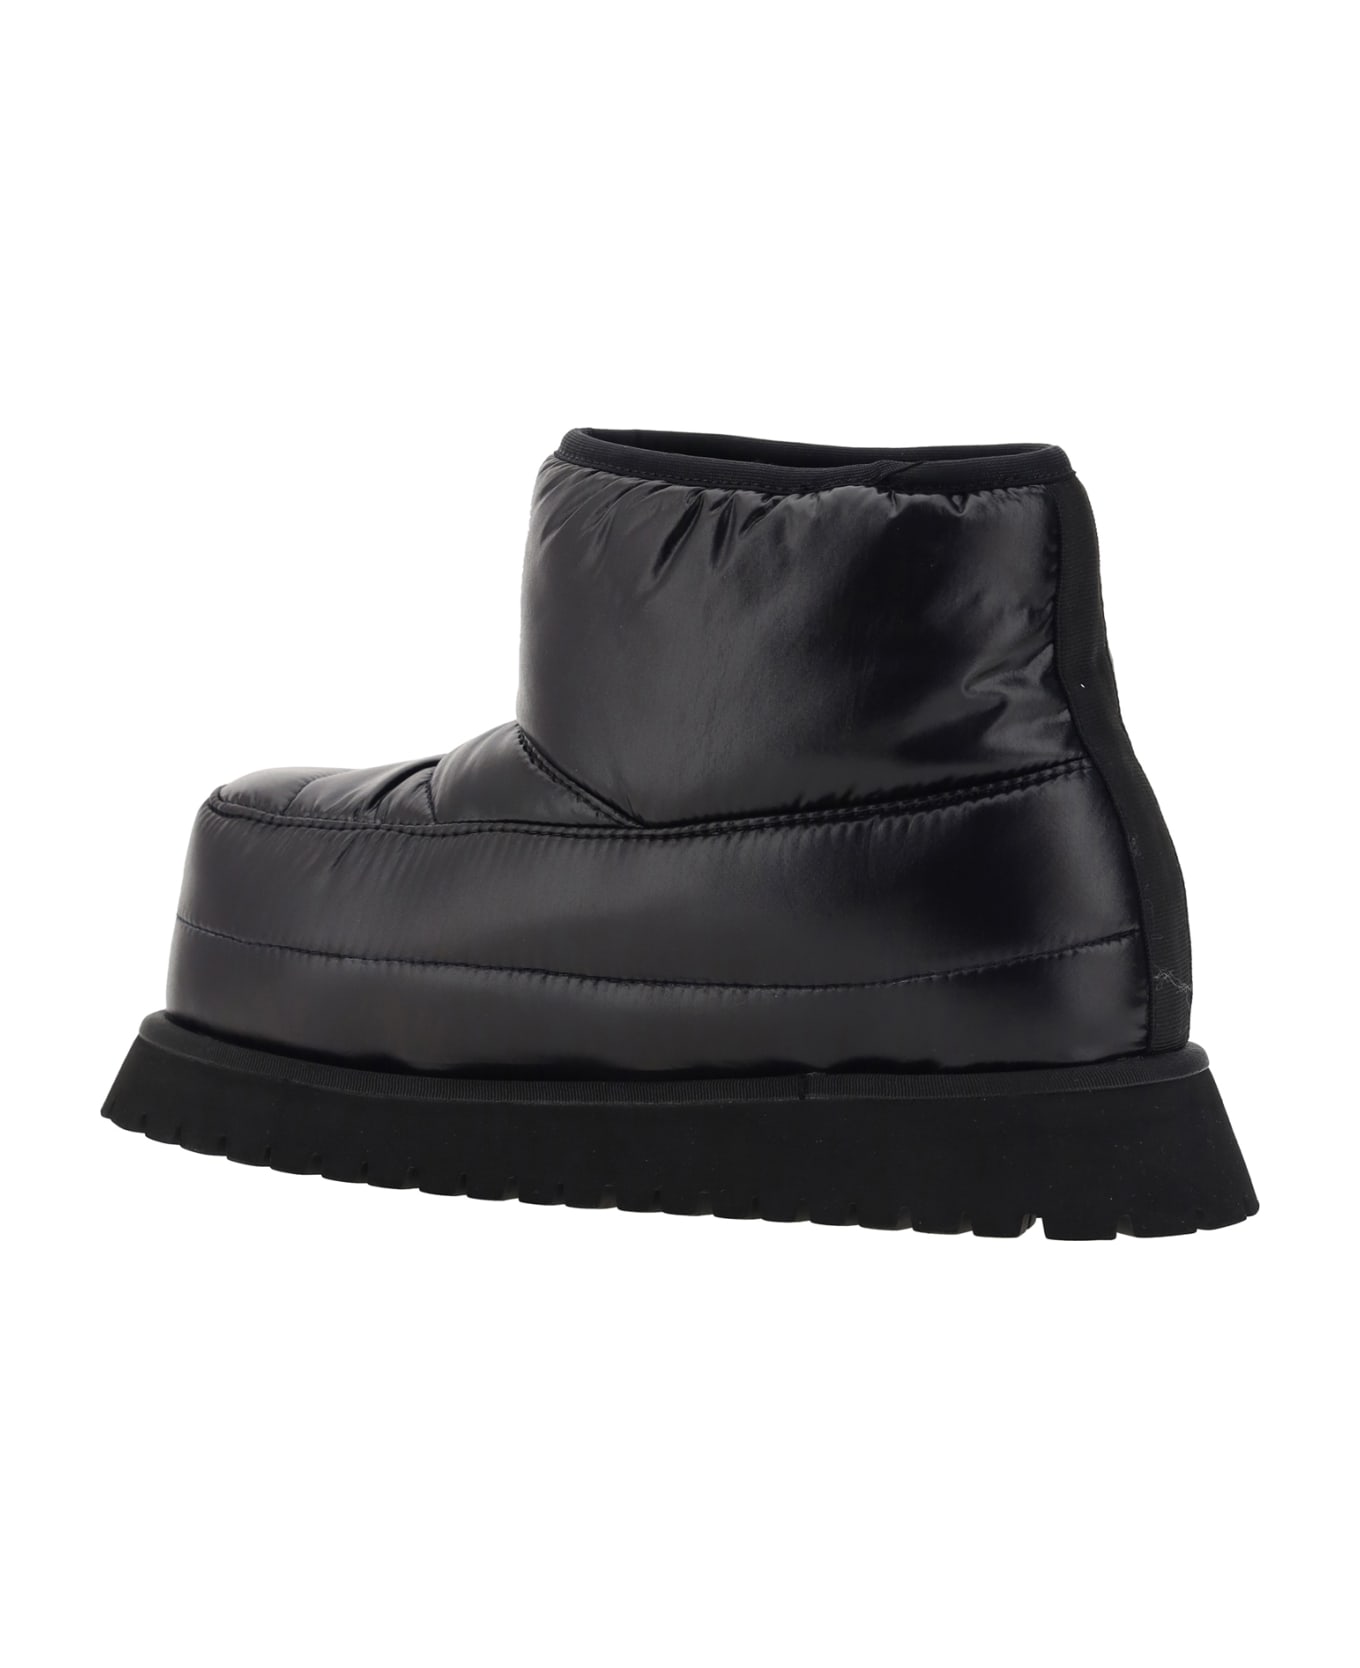 MM6 Maison Margiela Padded Ankle Boots - T8013 ブーツ